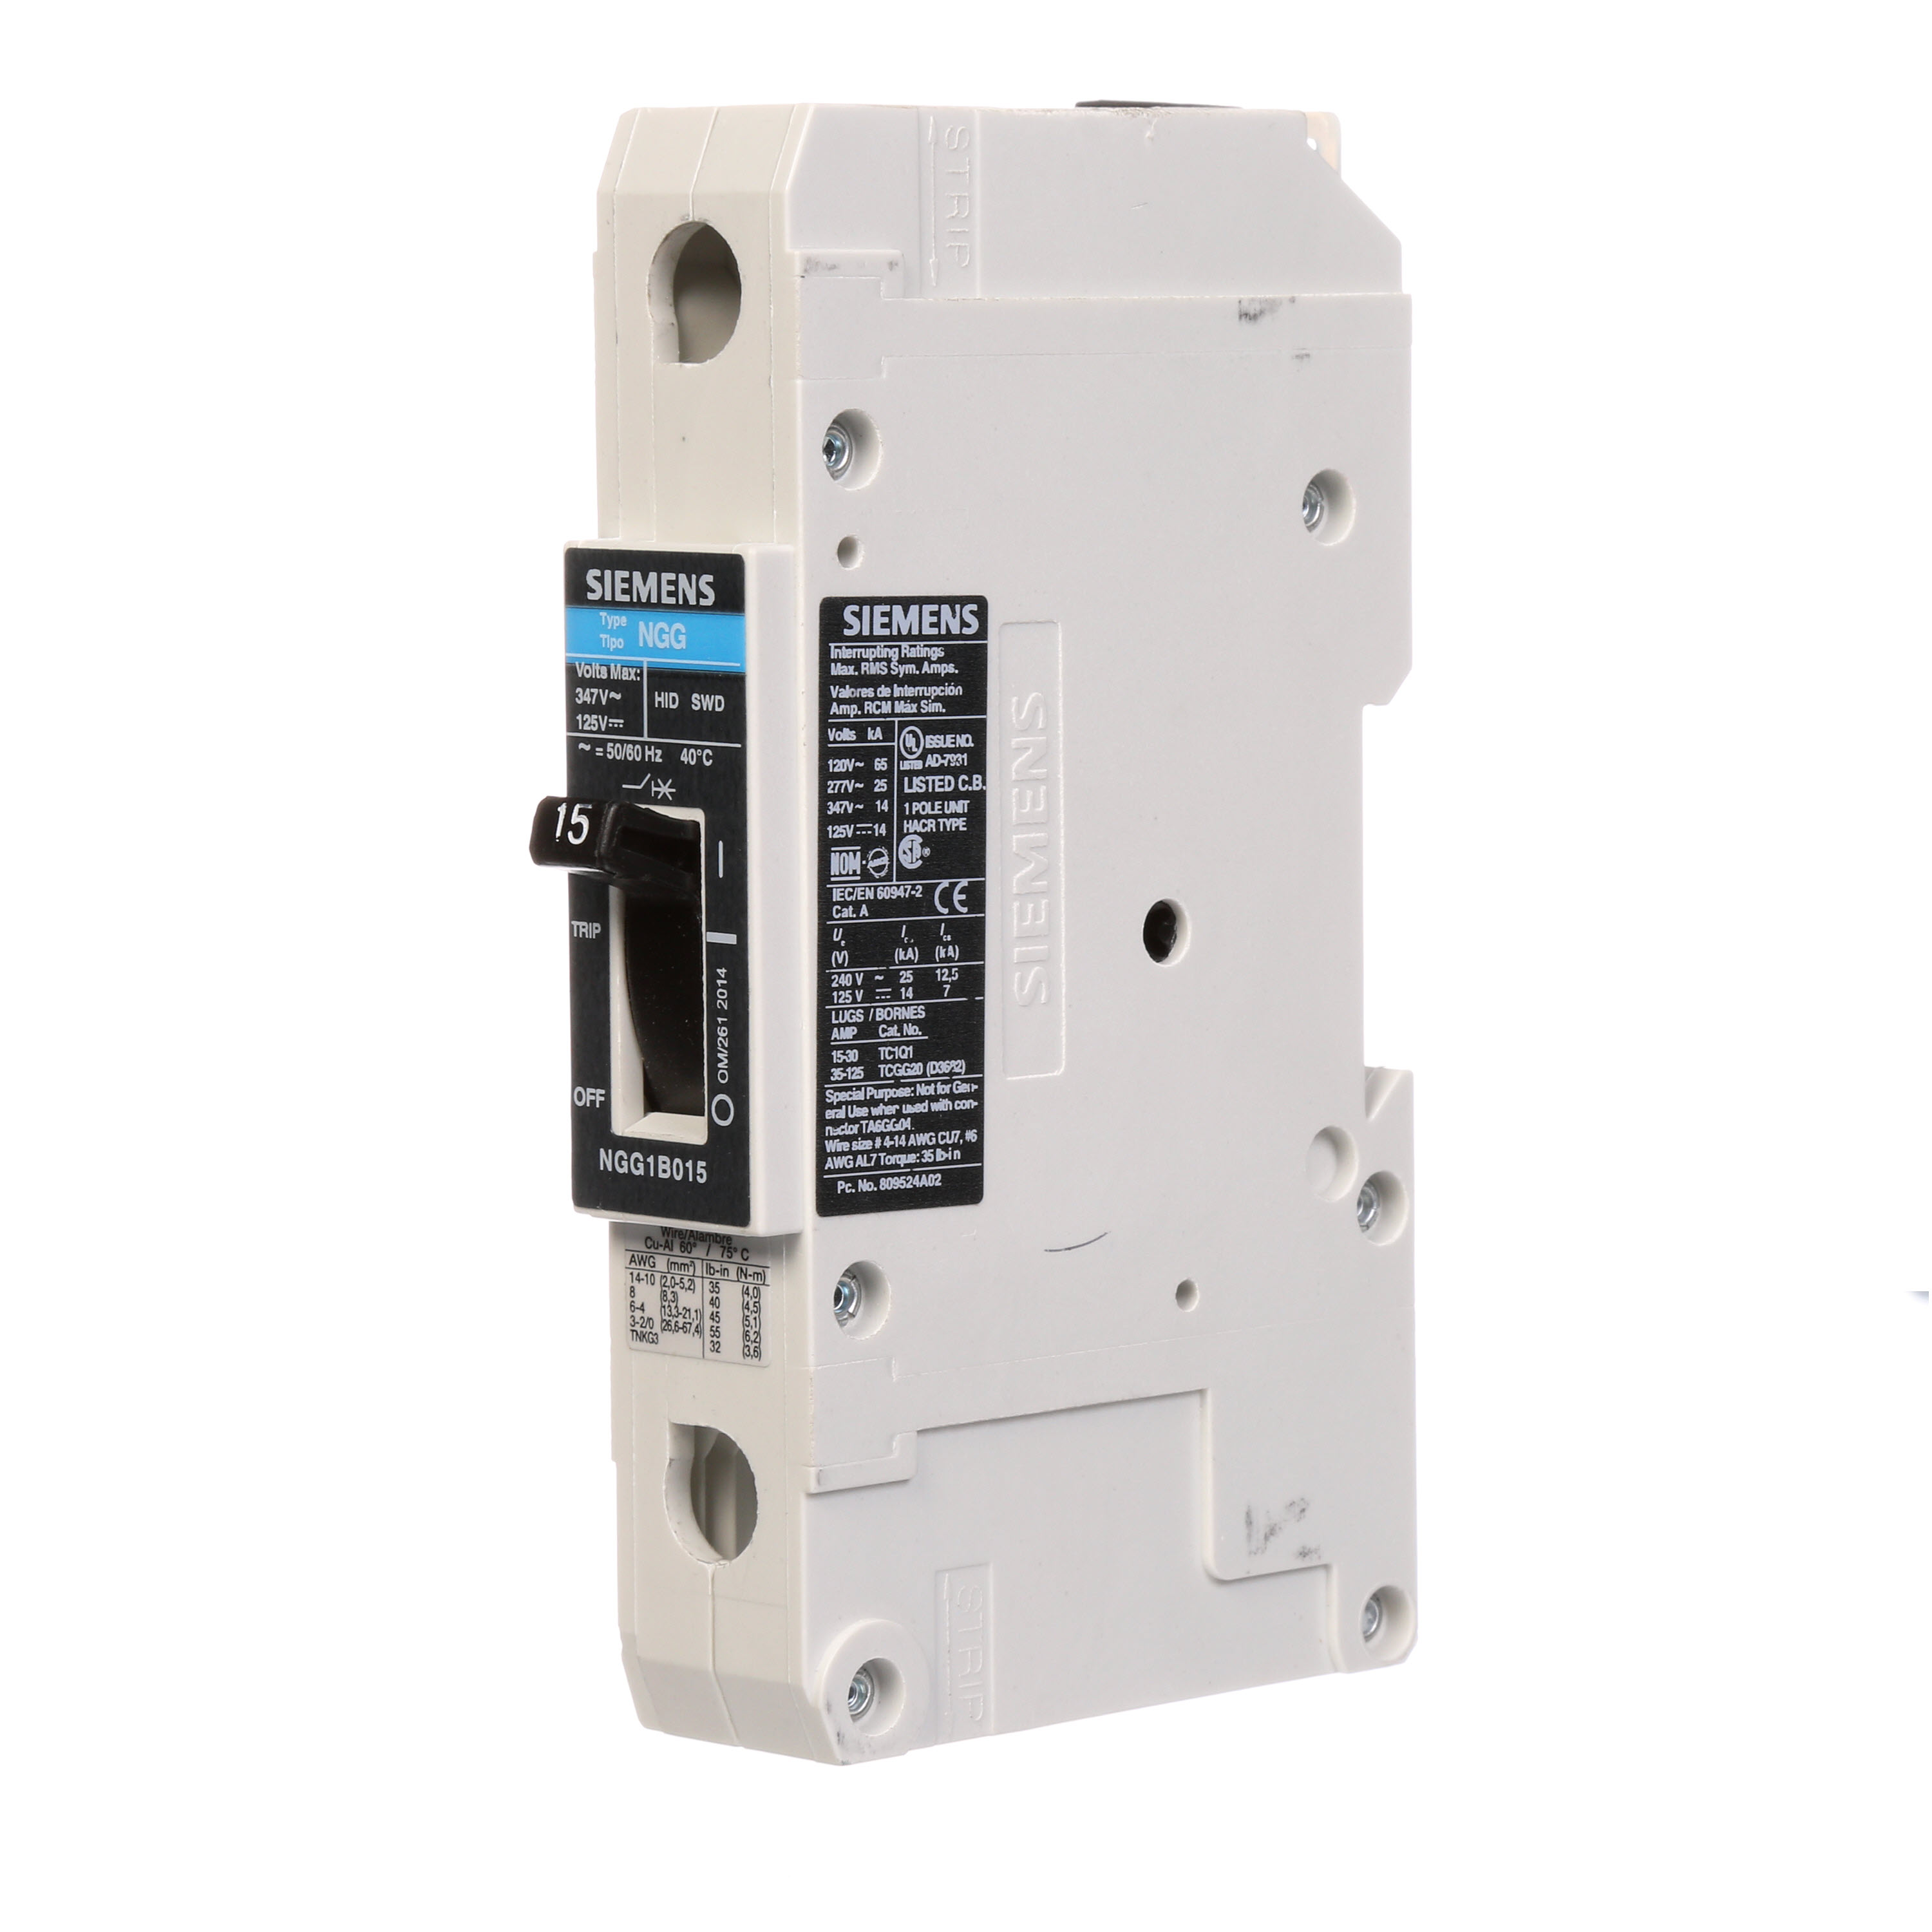 SIEMENS LOW VOLTAGE G FRAME CIRCUIT BREAKER WITH THERMAL - MAGNETIC TRIP. UL LISTED NGG FRAME WITH STANDARD BREAKING CAPACITY. 15A 1-POLE (14KAIC AT 347V) (25KAIC AT 277V). SPECIAL FEATURES MOUNTS ON DIN RAIL / SCREW, LINE AND LOAD SIDE LUGS (TC1Q1) WIRE RANGE 14 - 10 AWS (CU/AL). DIMENSIONS (W x H x D) IN 1 x 5.4 x 2.8.